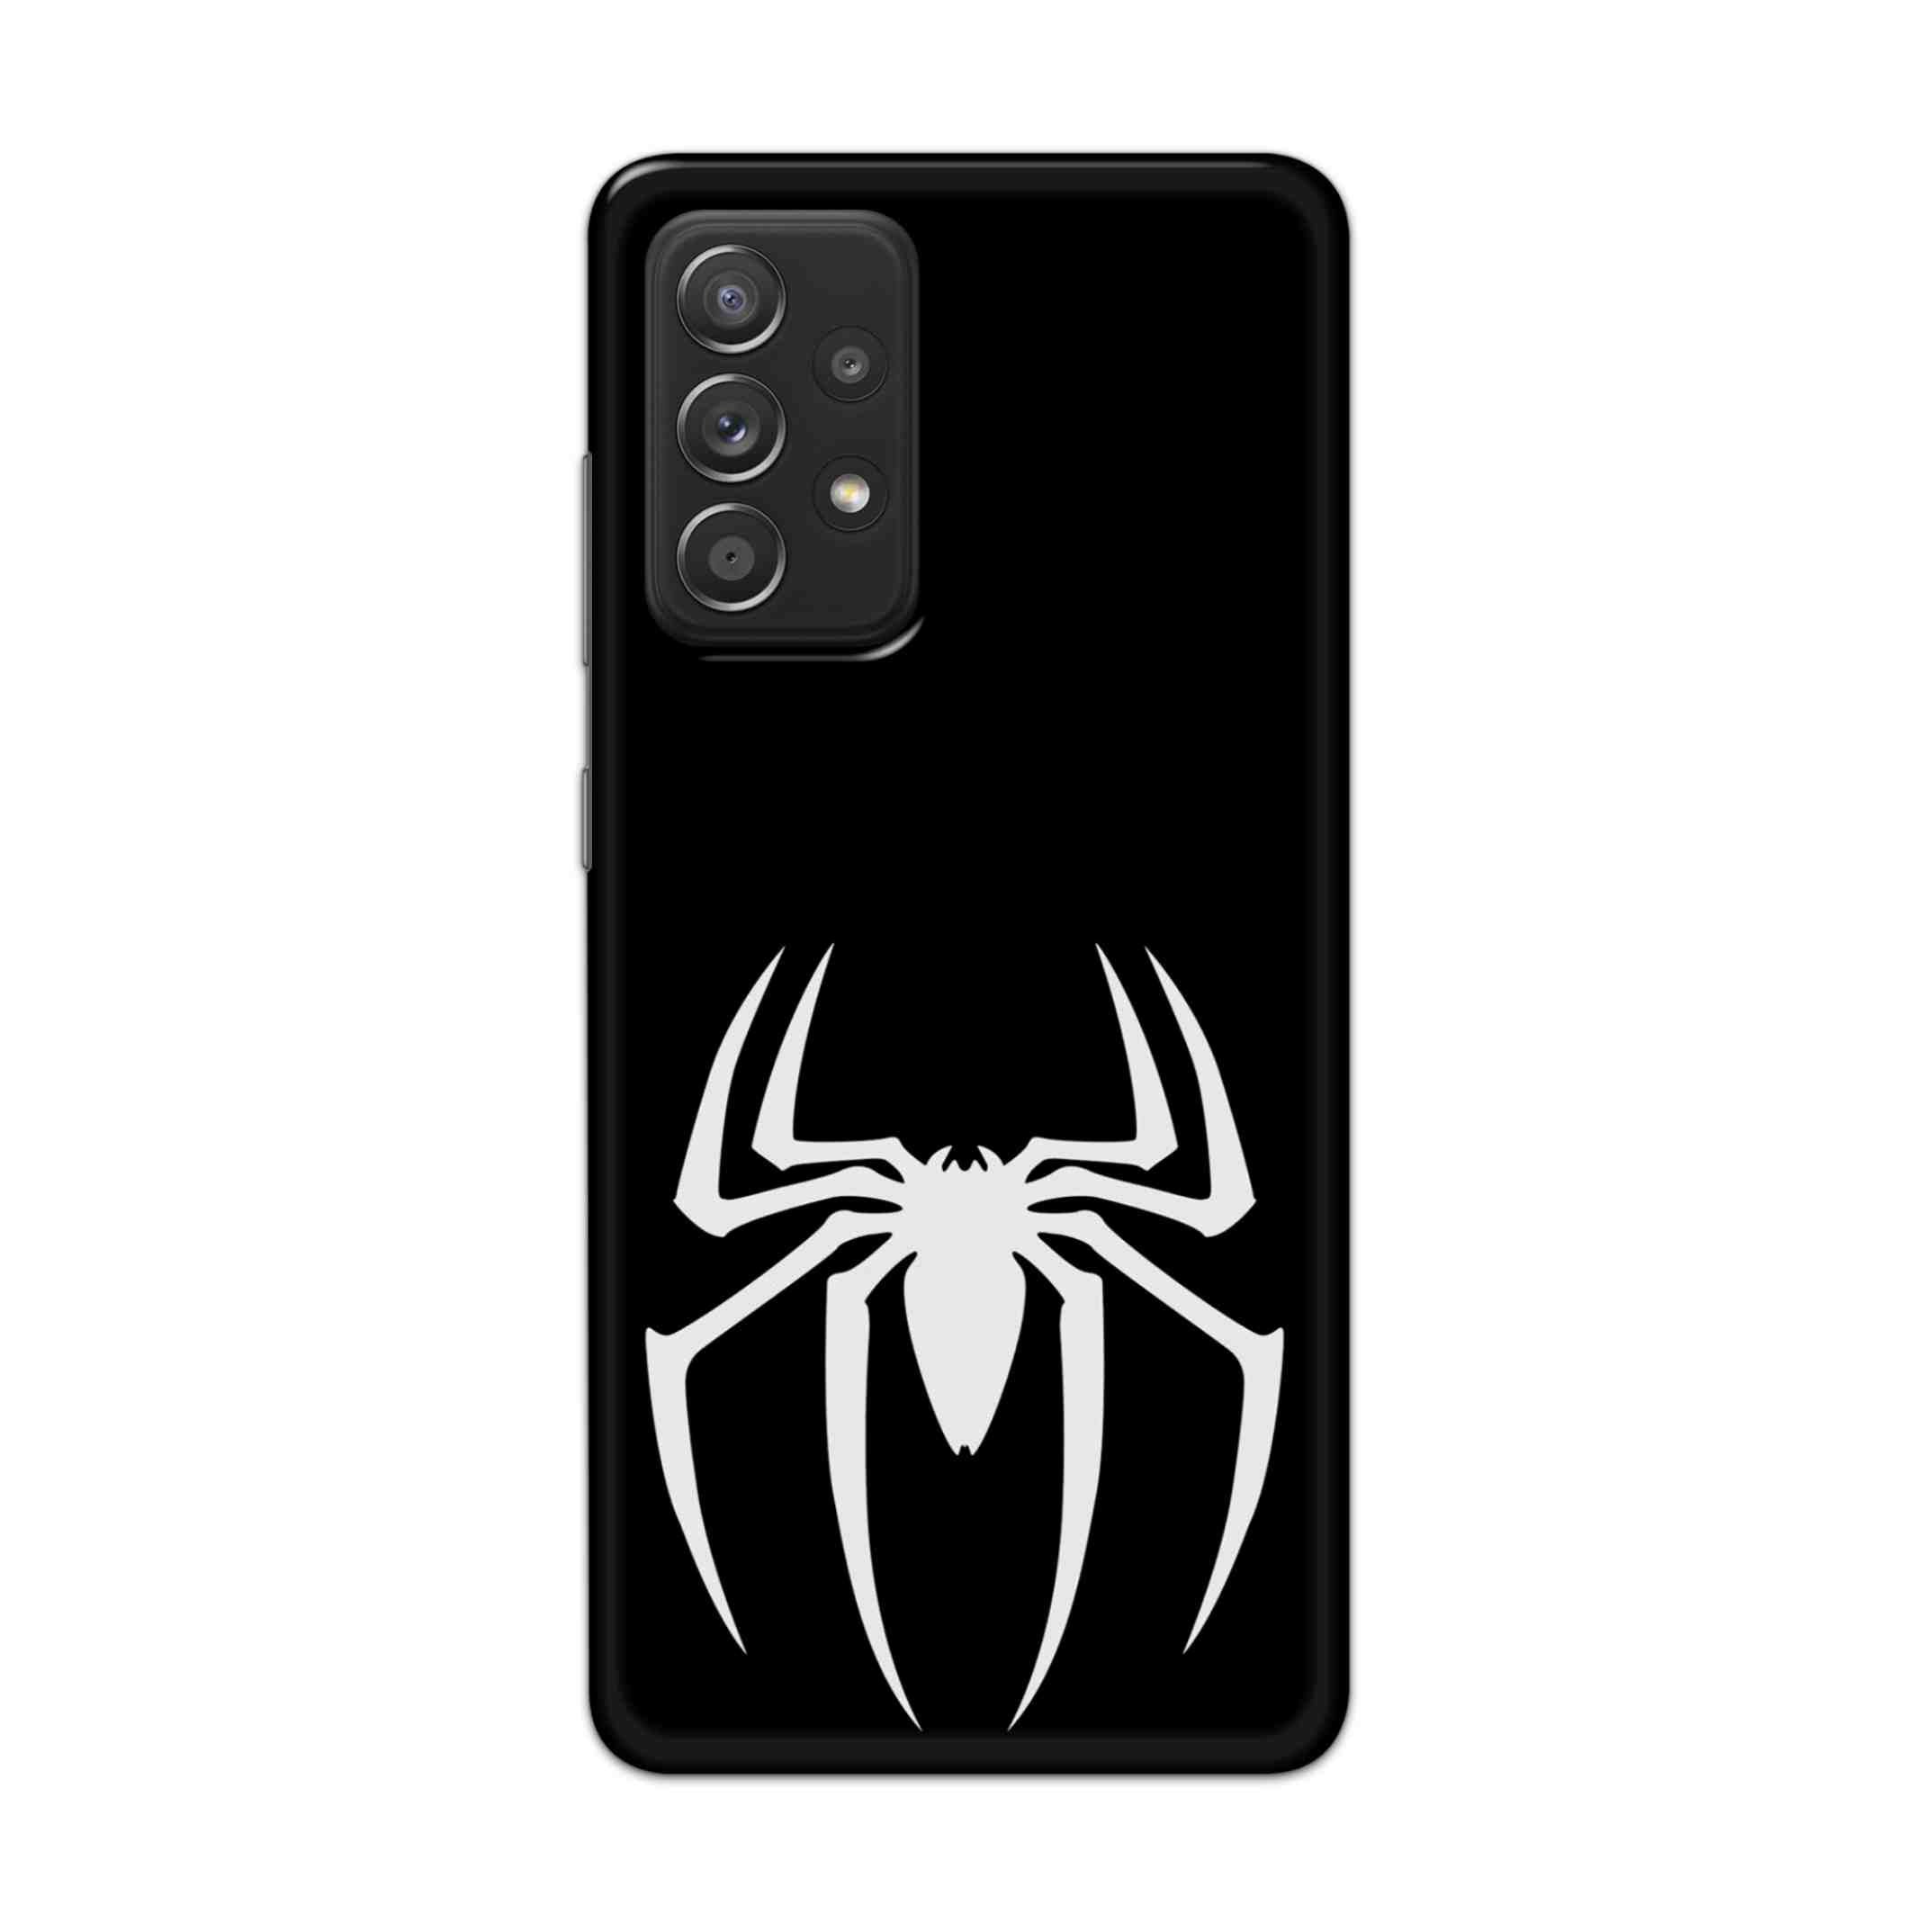 Buy Black Spiderman Logo Hard Back Mobile Phone Case Cover For Samsung Galaxy A52 Online